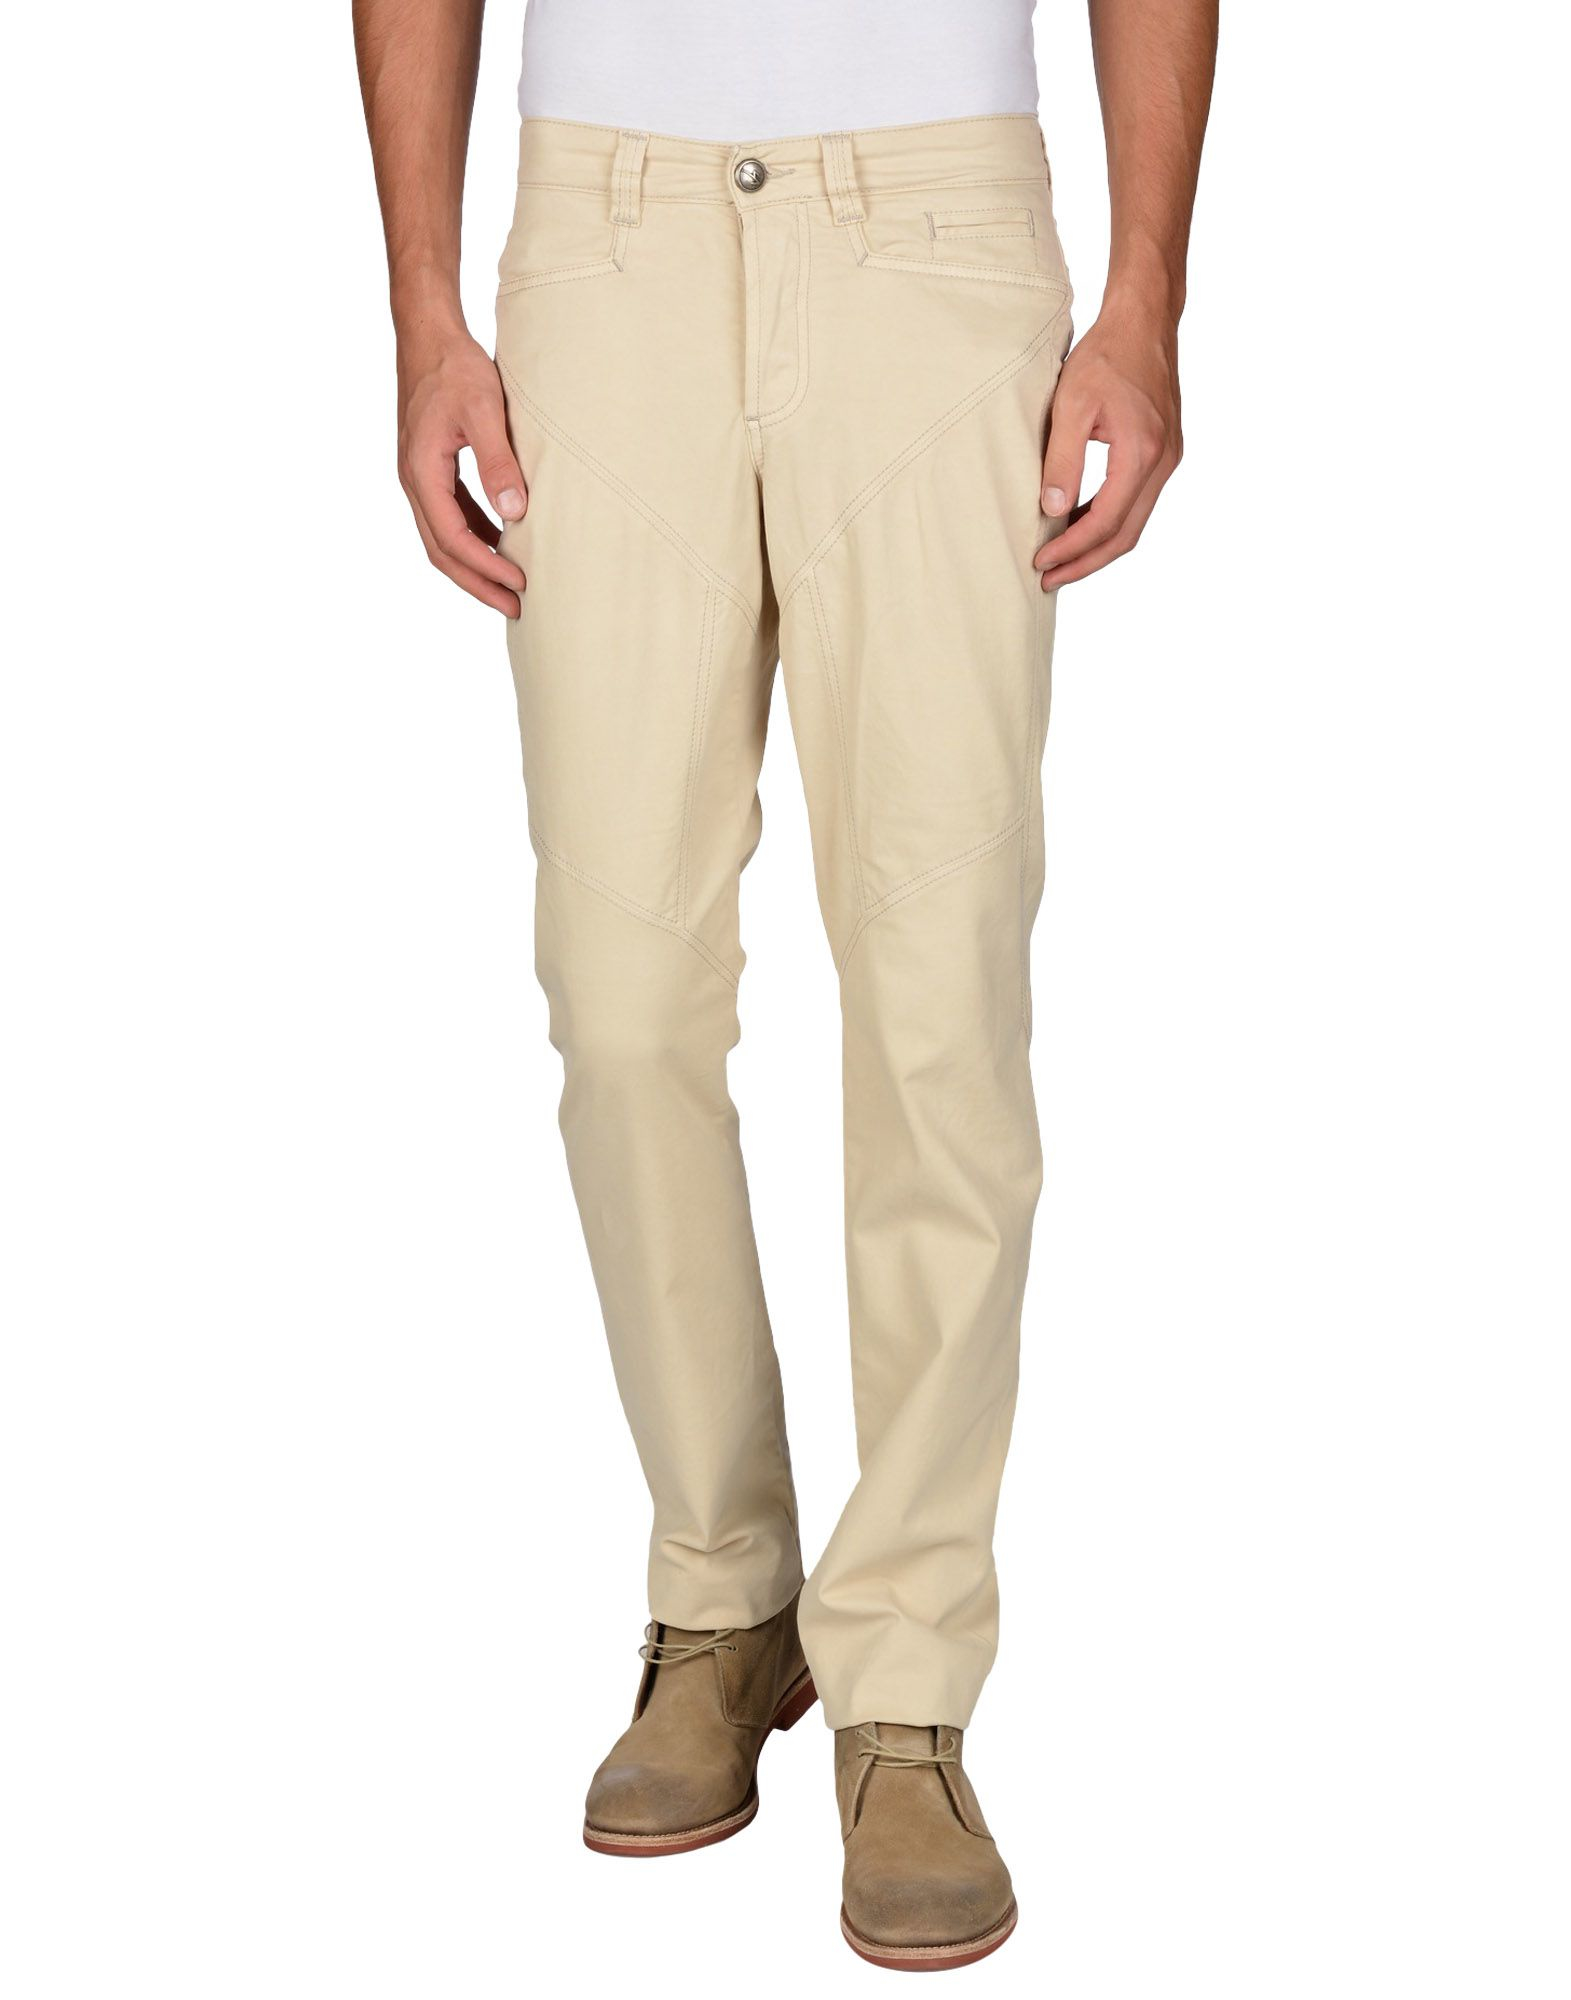 9.2 by carlo chionna Casual Trouser in Natural for Men (Beige) - Save ...